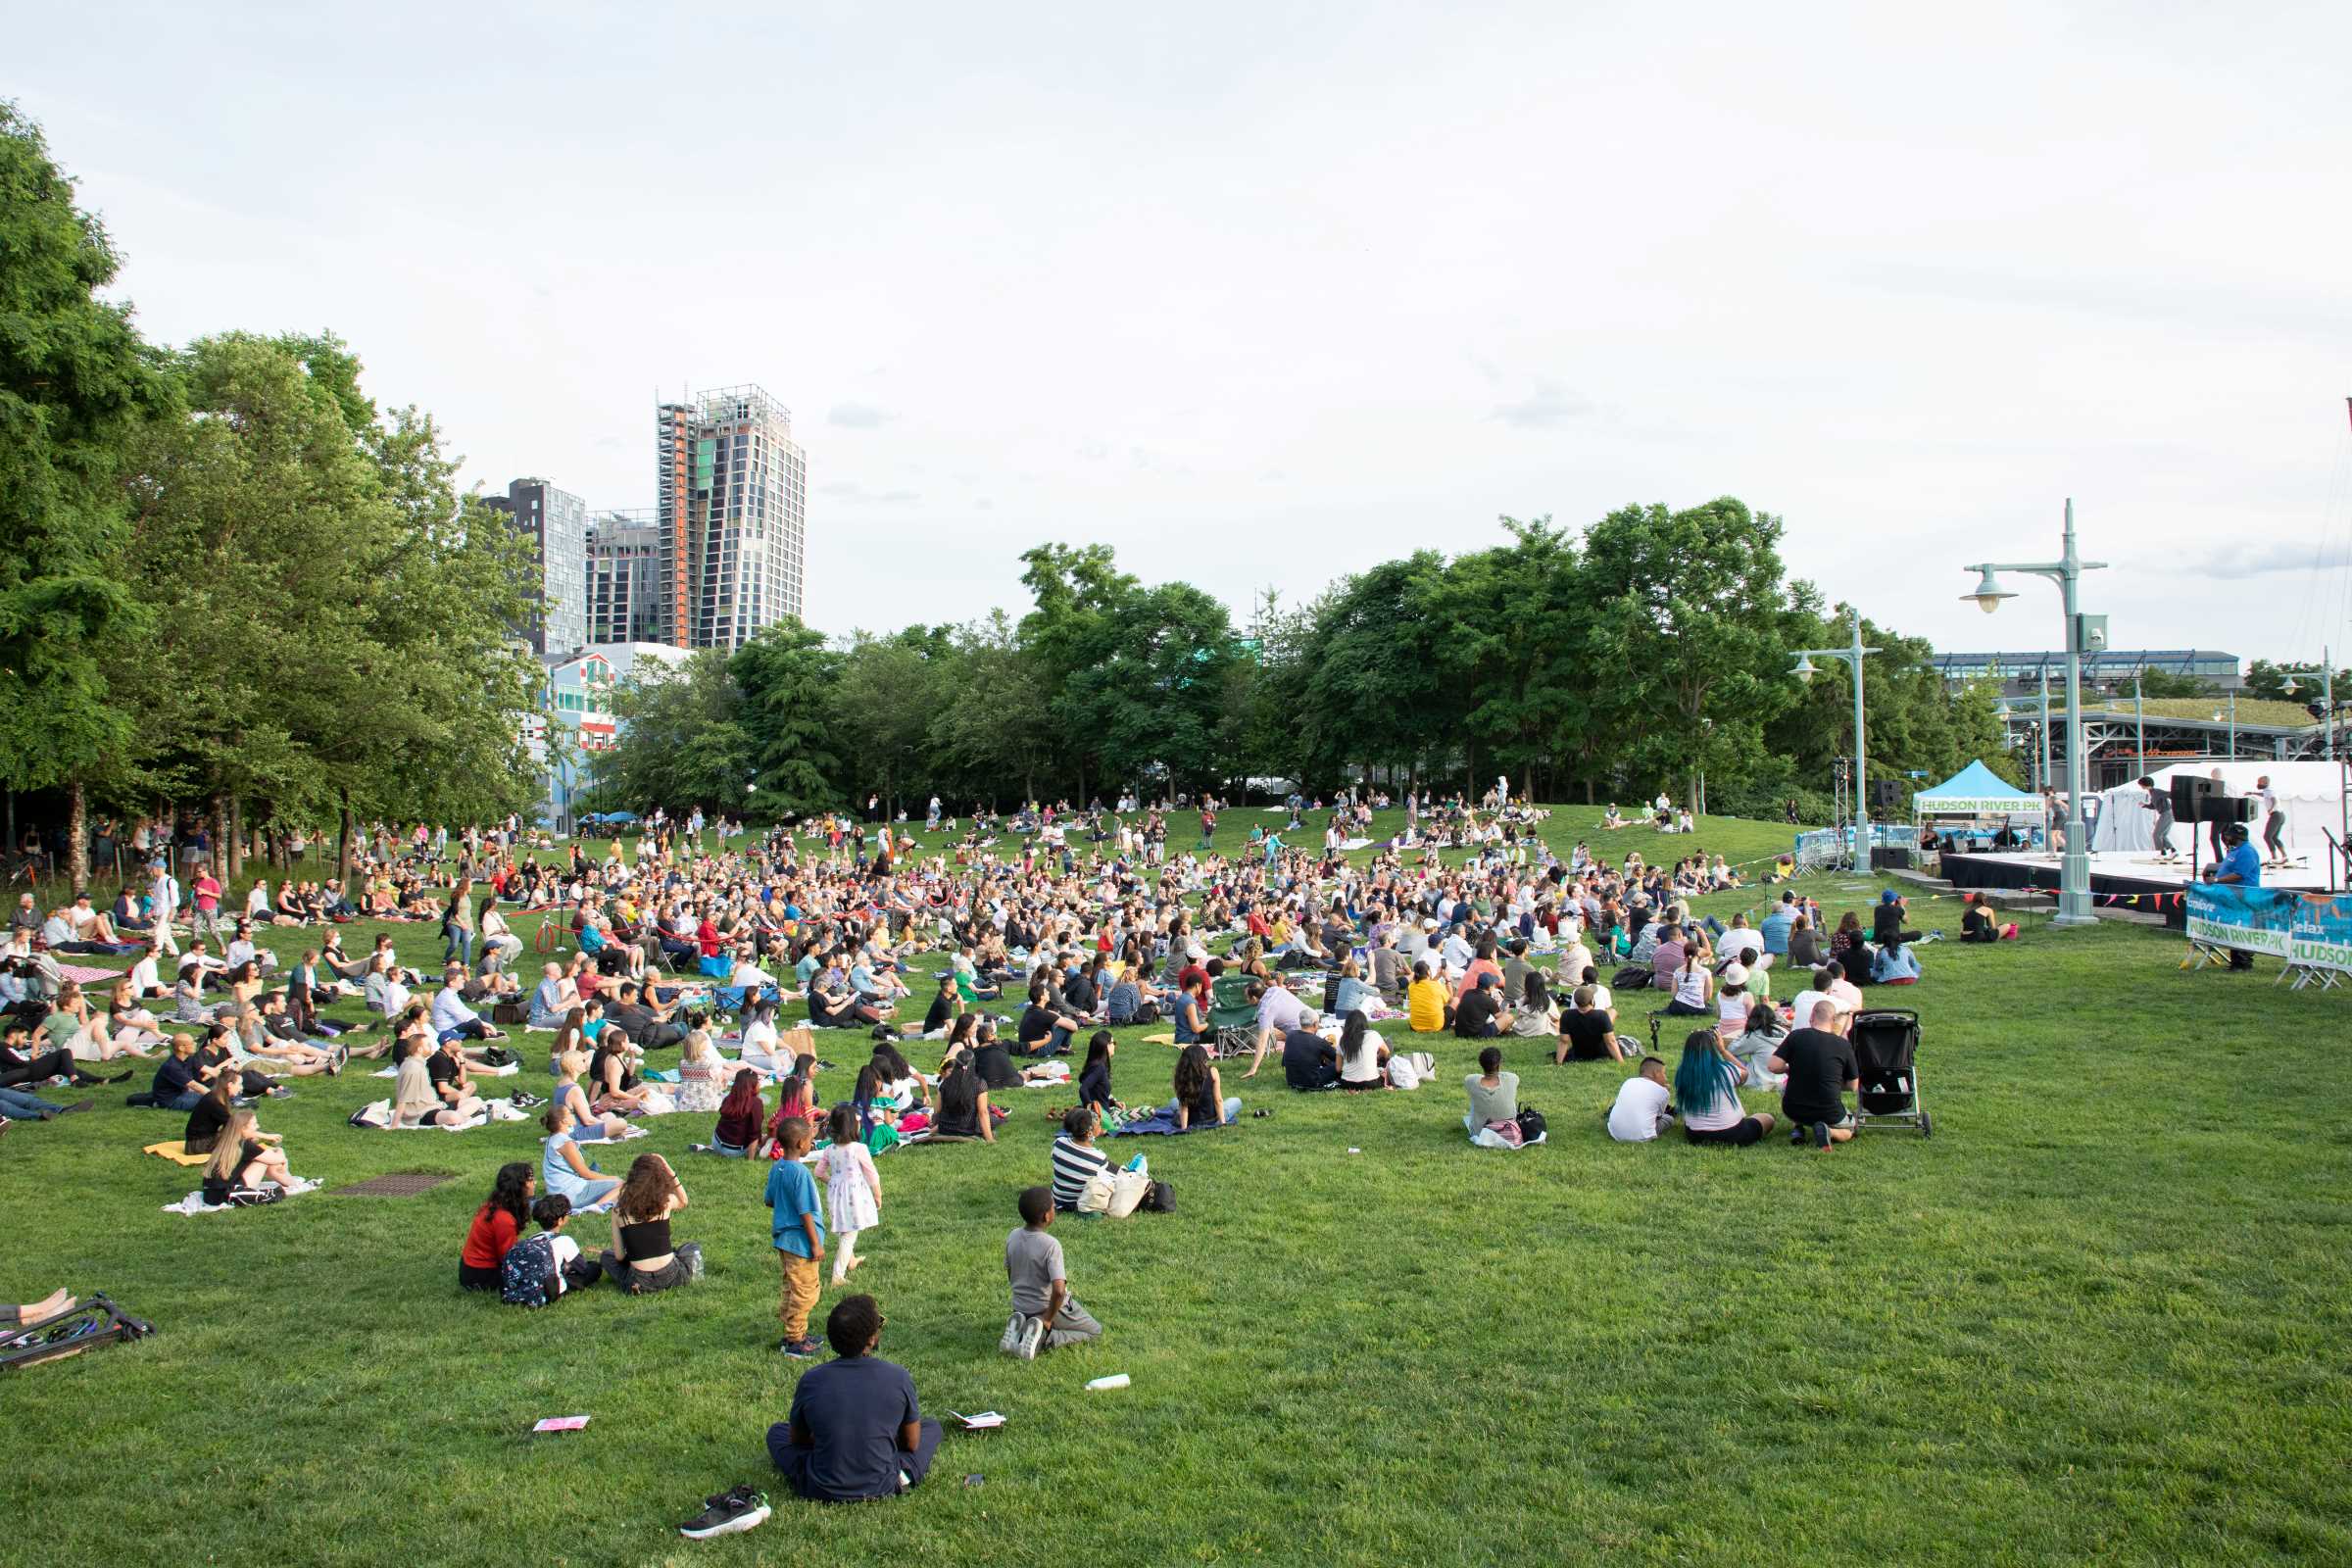 The Hudson River Dance Festival audience on the Pier 57 lawn